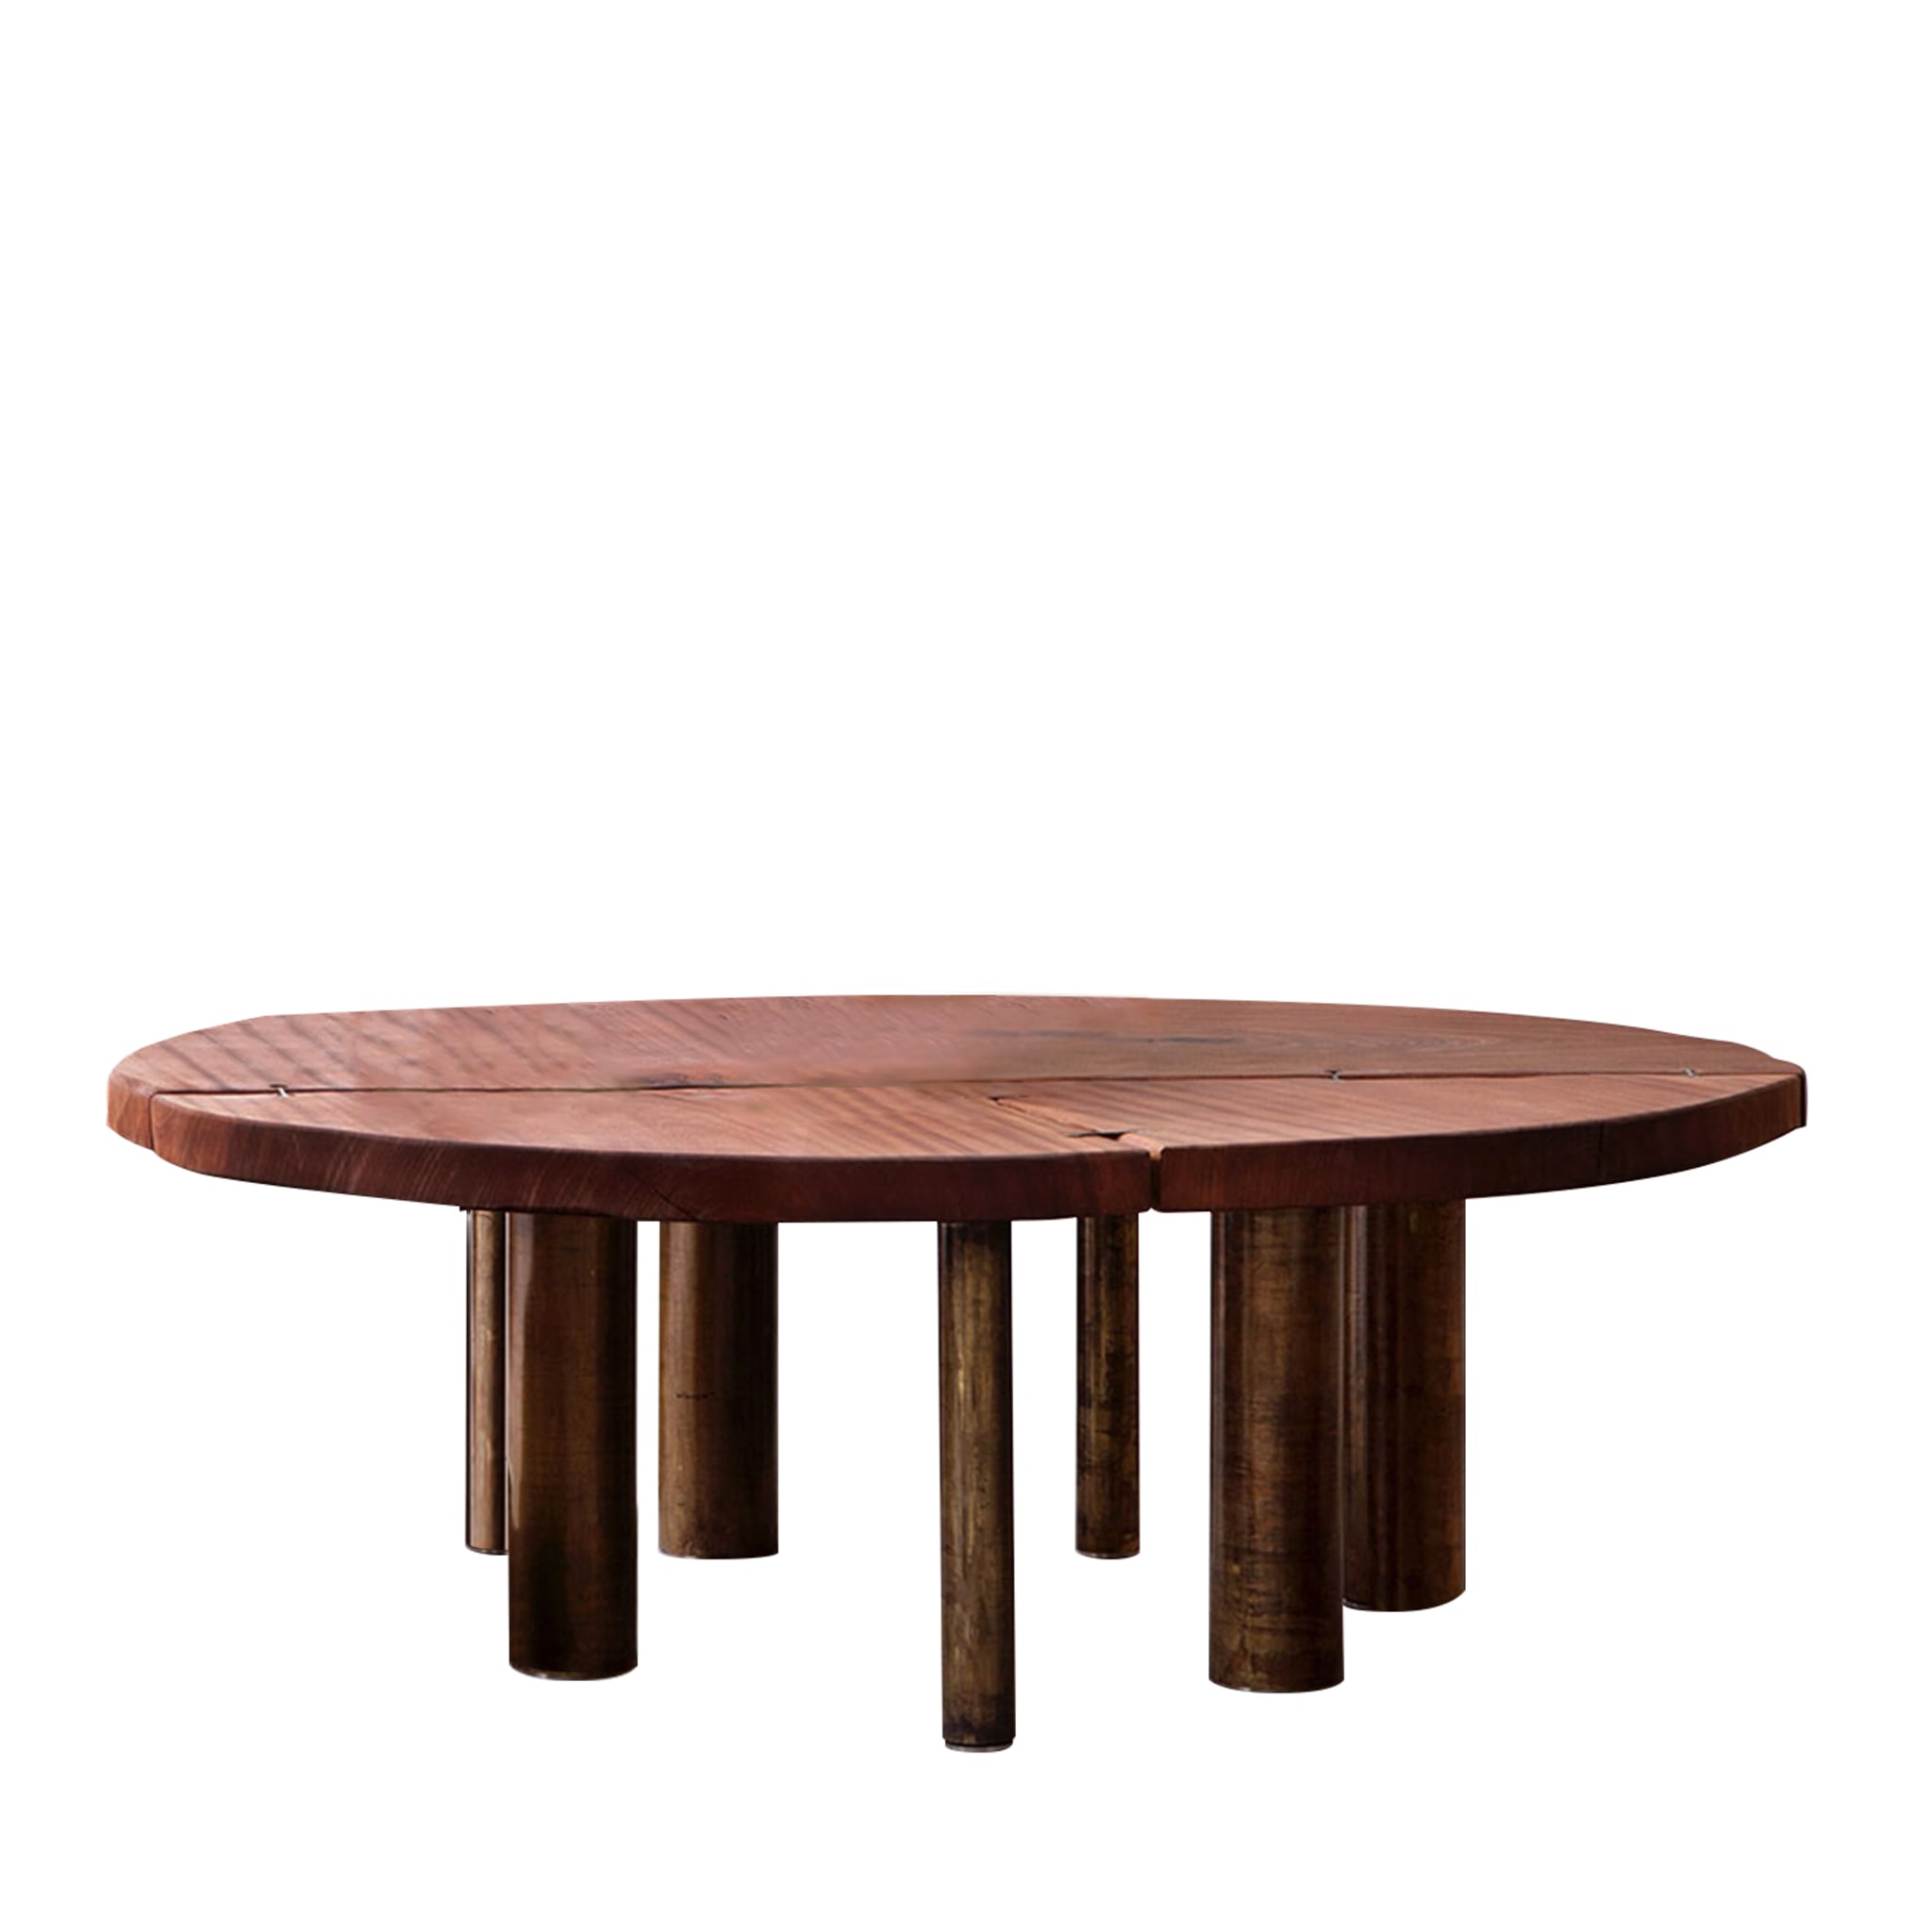 10TH Joint Circular Dining Table - Main view